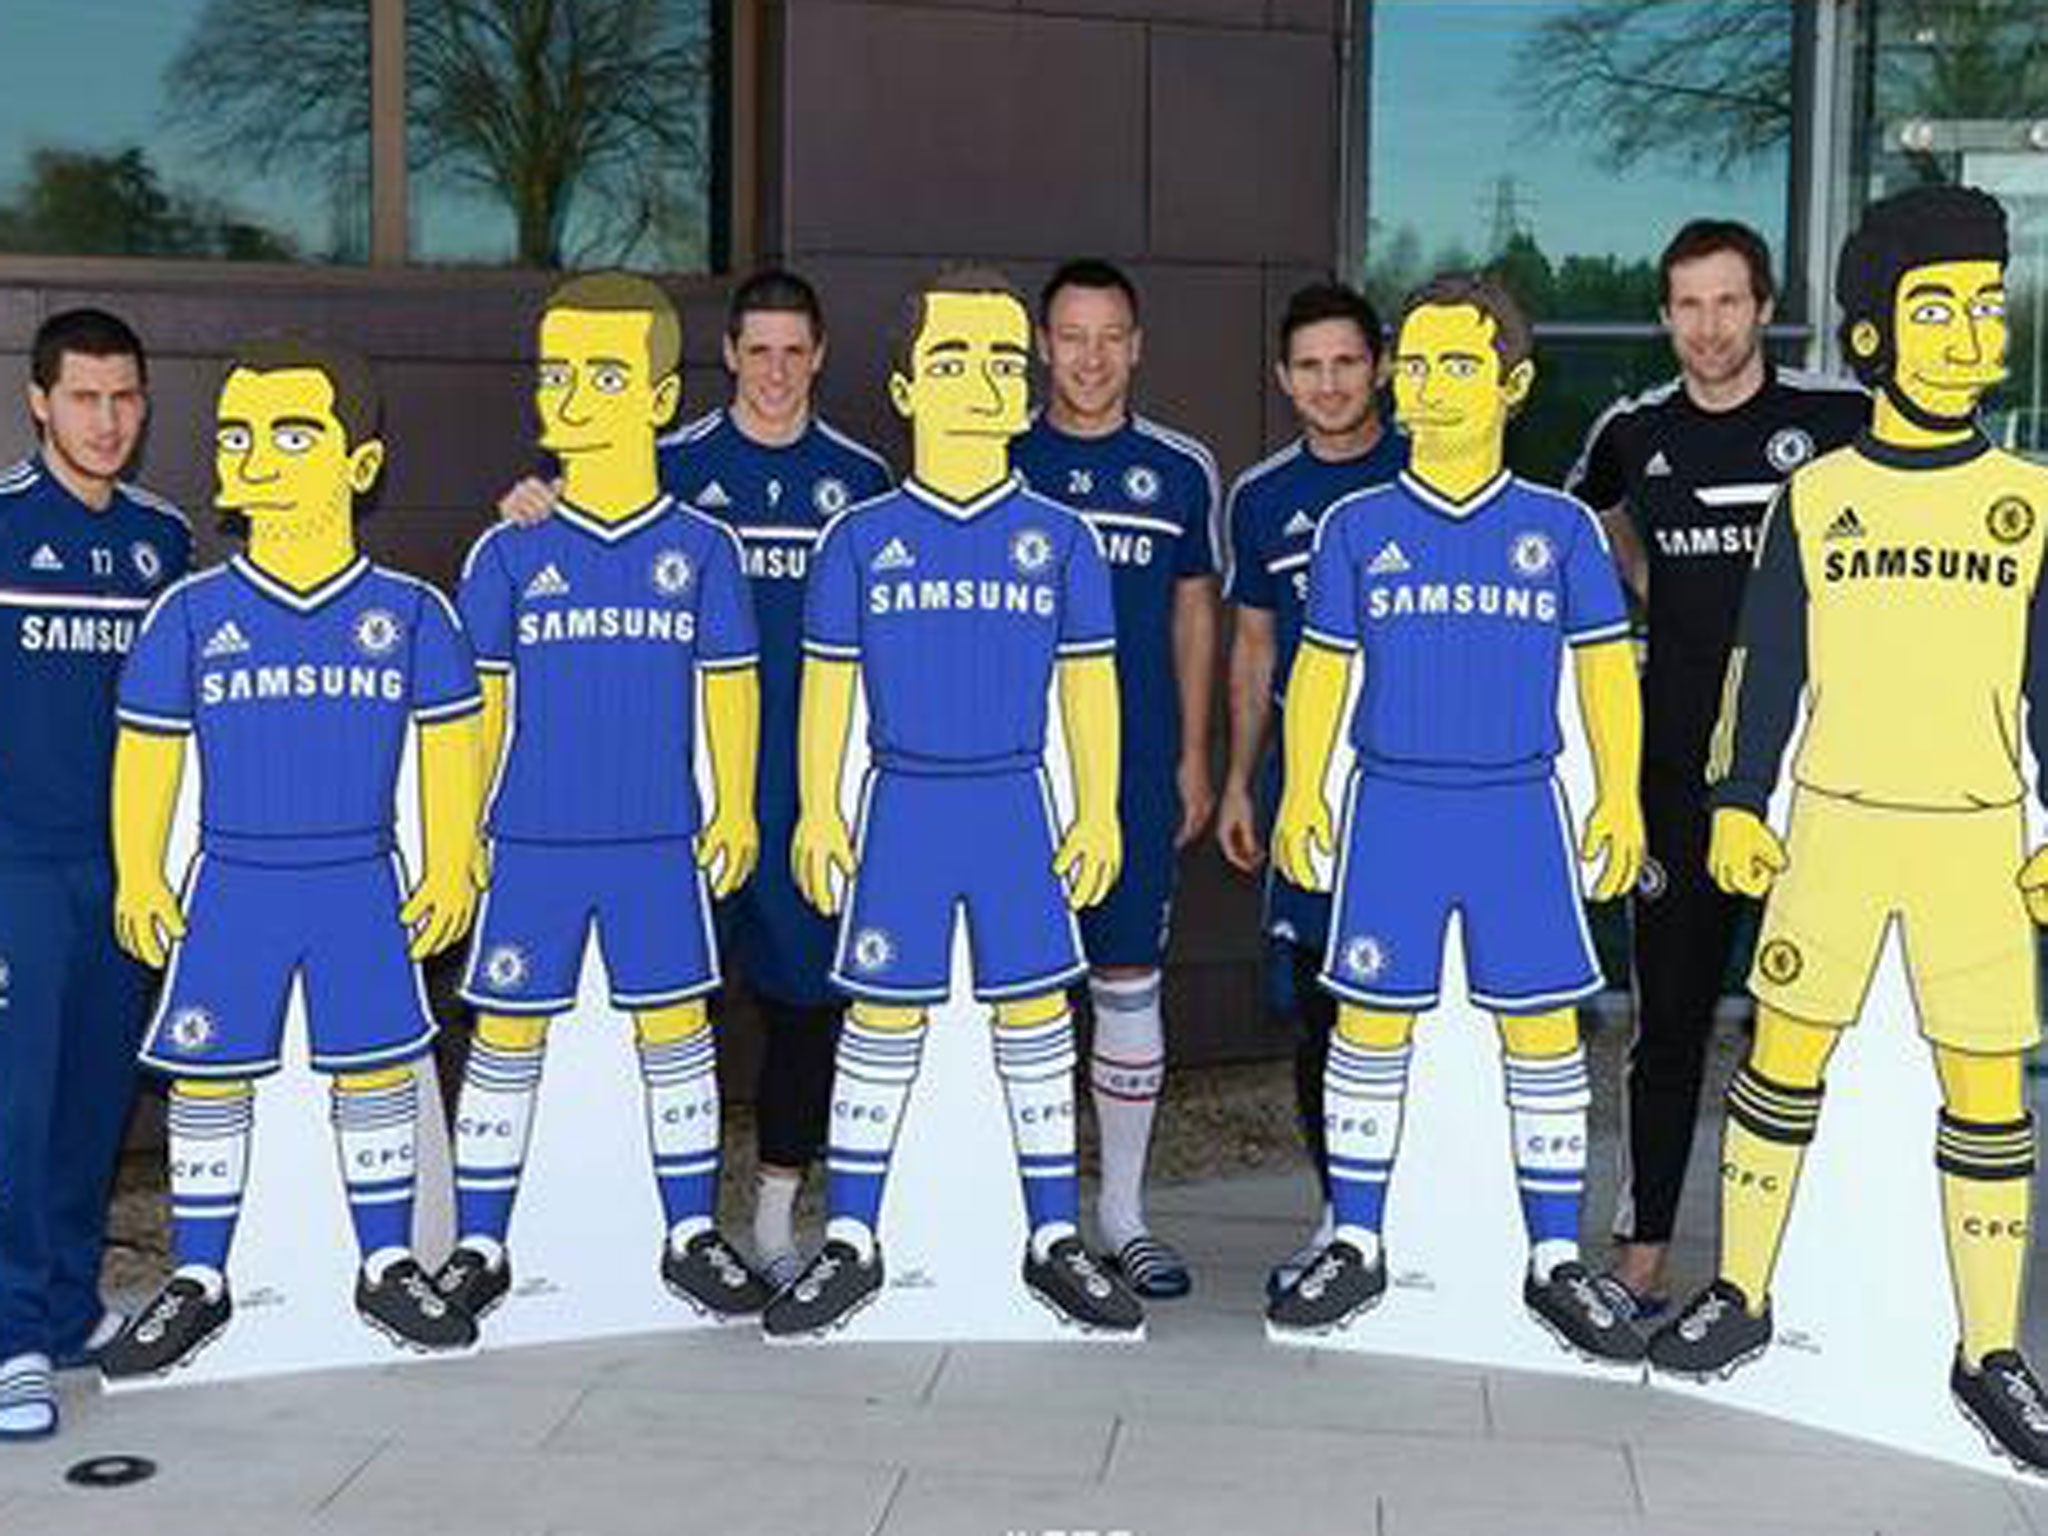 Eden Hazard, Fernando Torres, John Terry, Frank Lampard and Petr Cech pose with their Simpsons doppelgangers